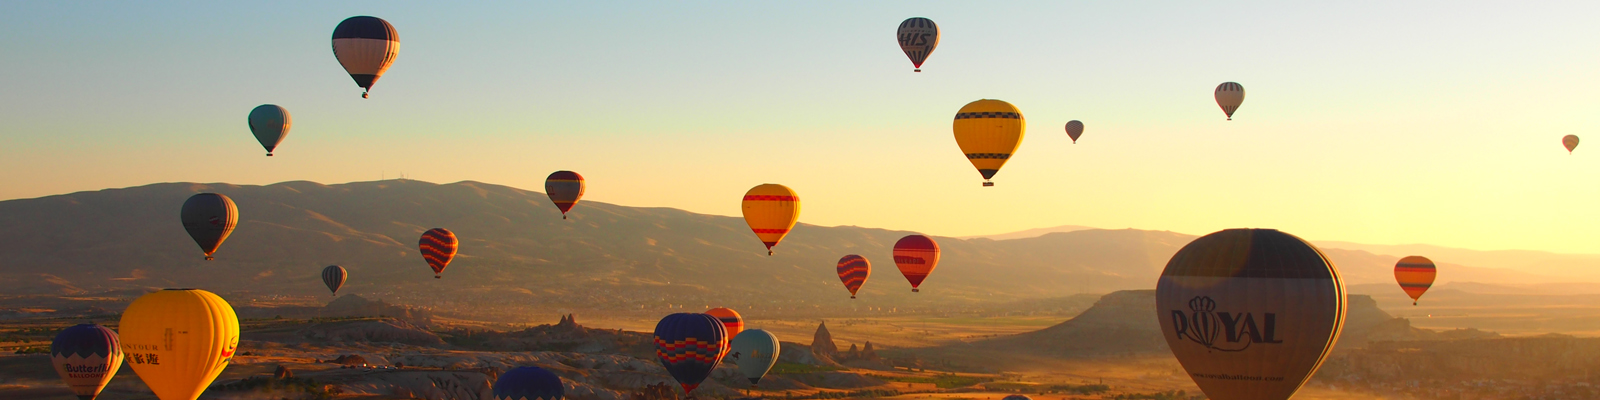 Colourful hot air balloons rising over a rugged southwest american landscape in the sunset